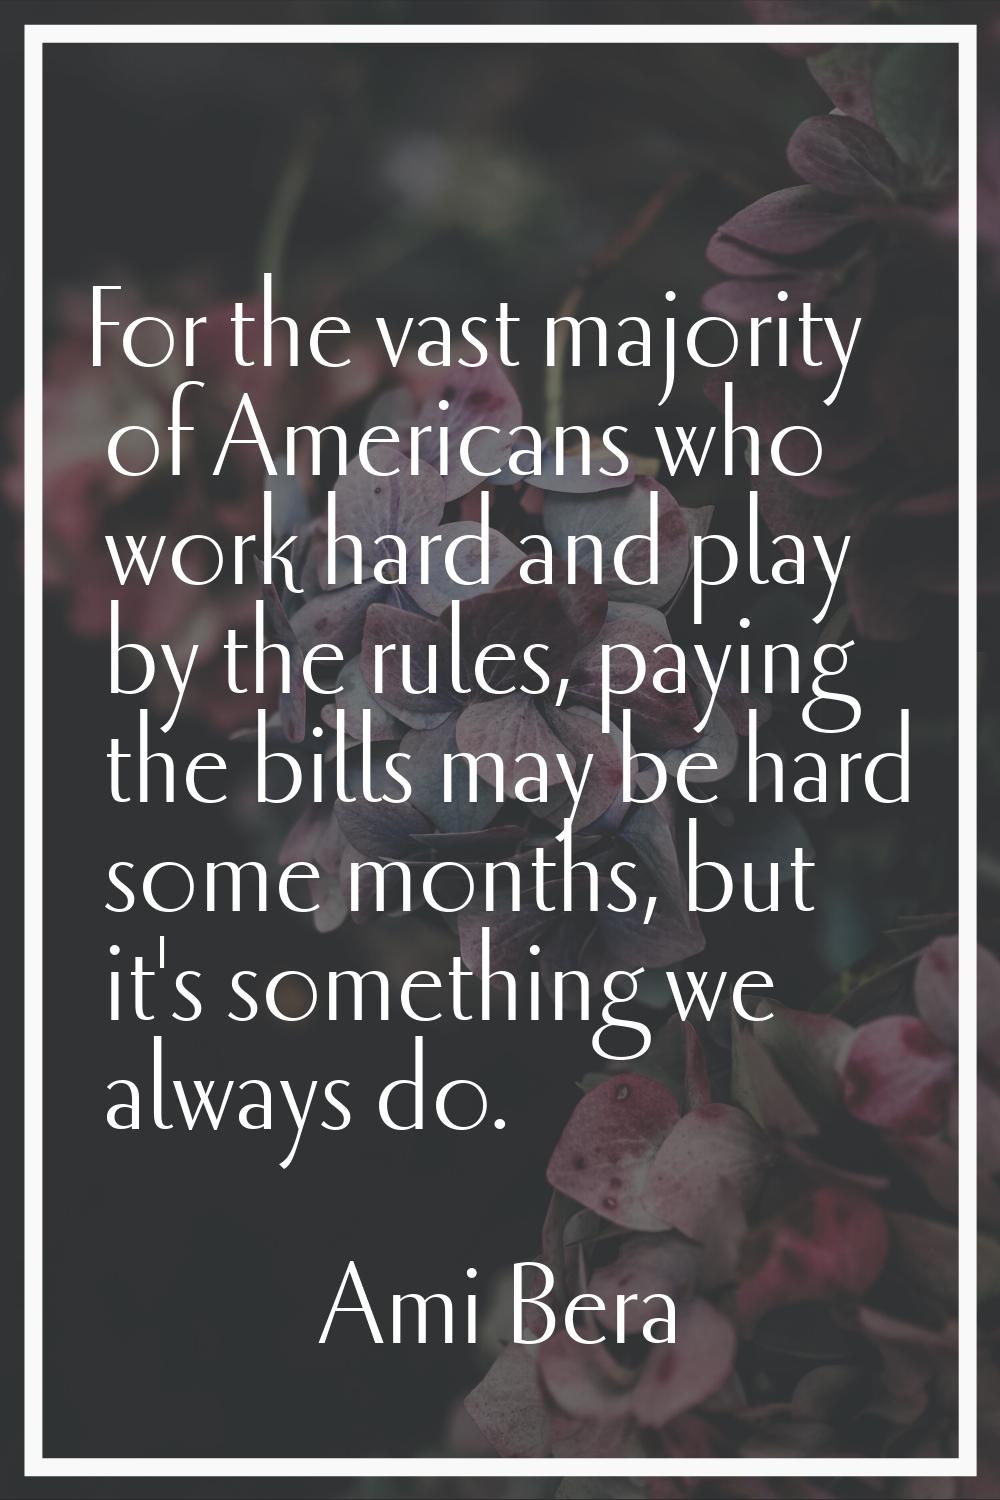 For the vast majority of Americans who work hard and play by the rules, paying the bills may be har